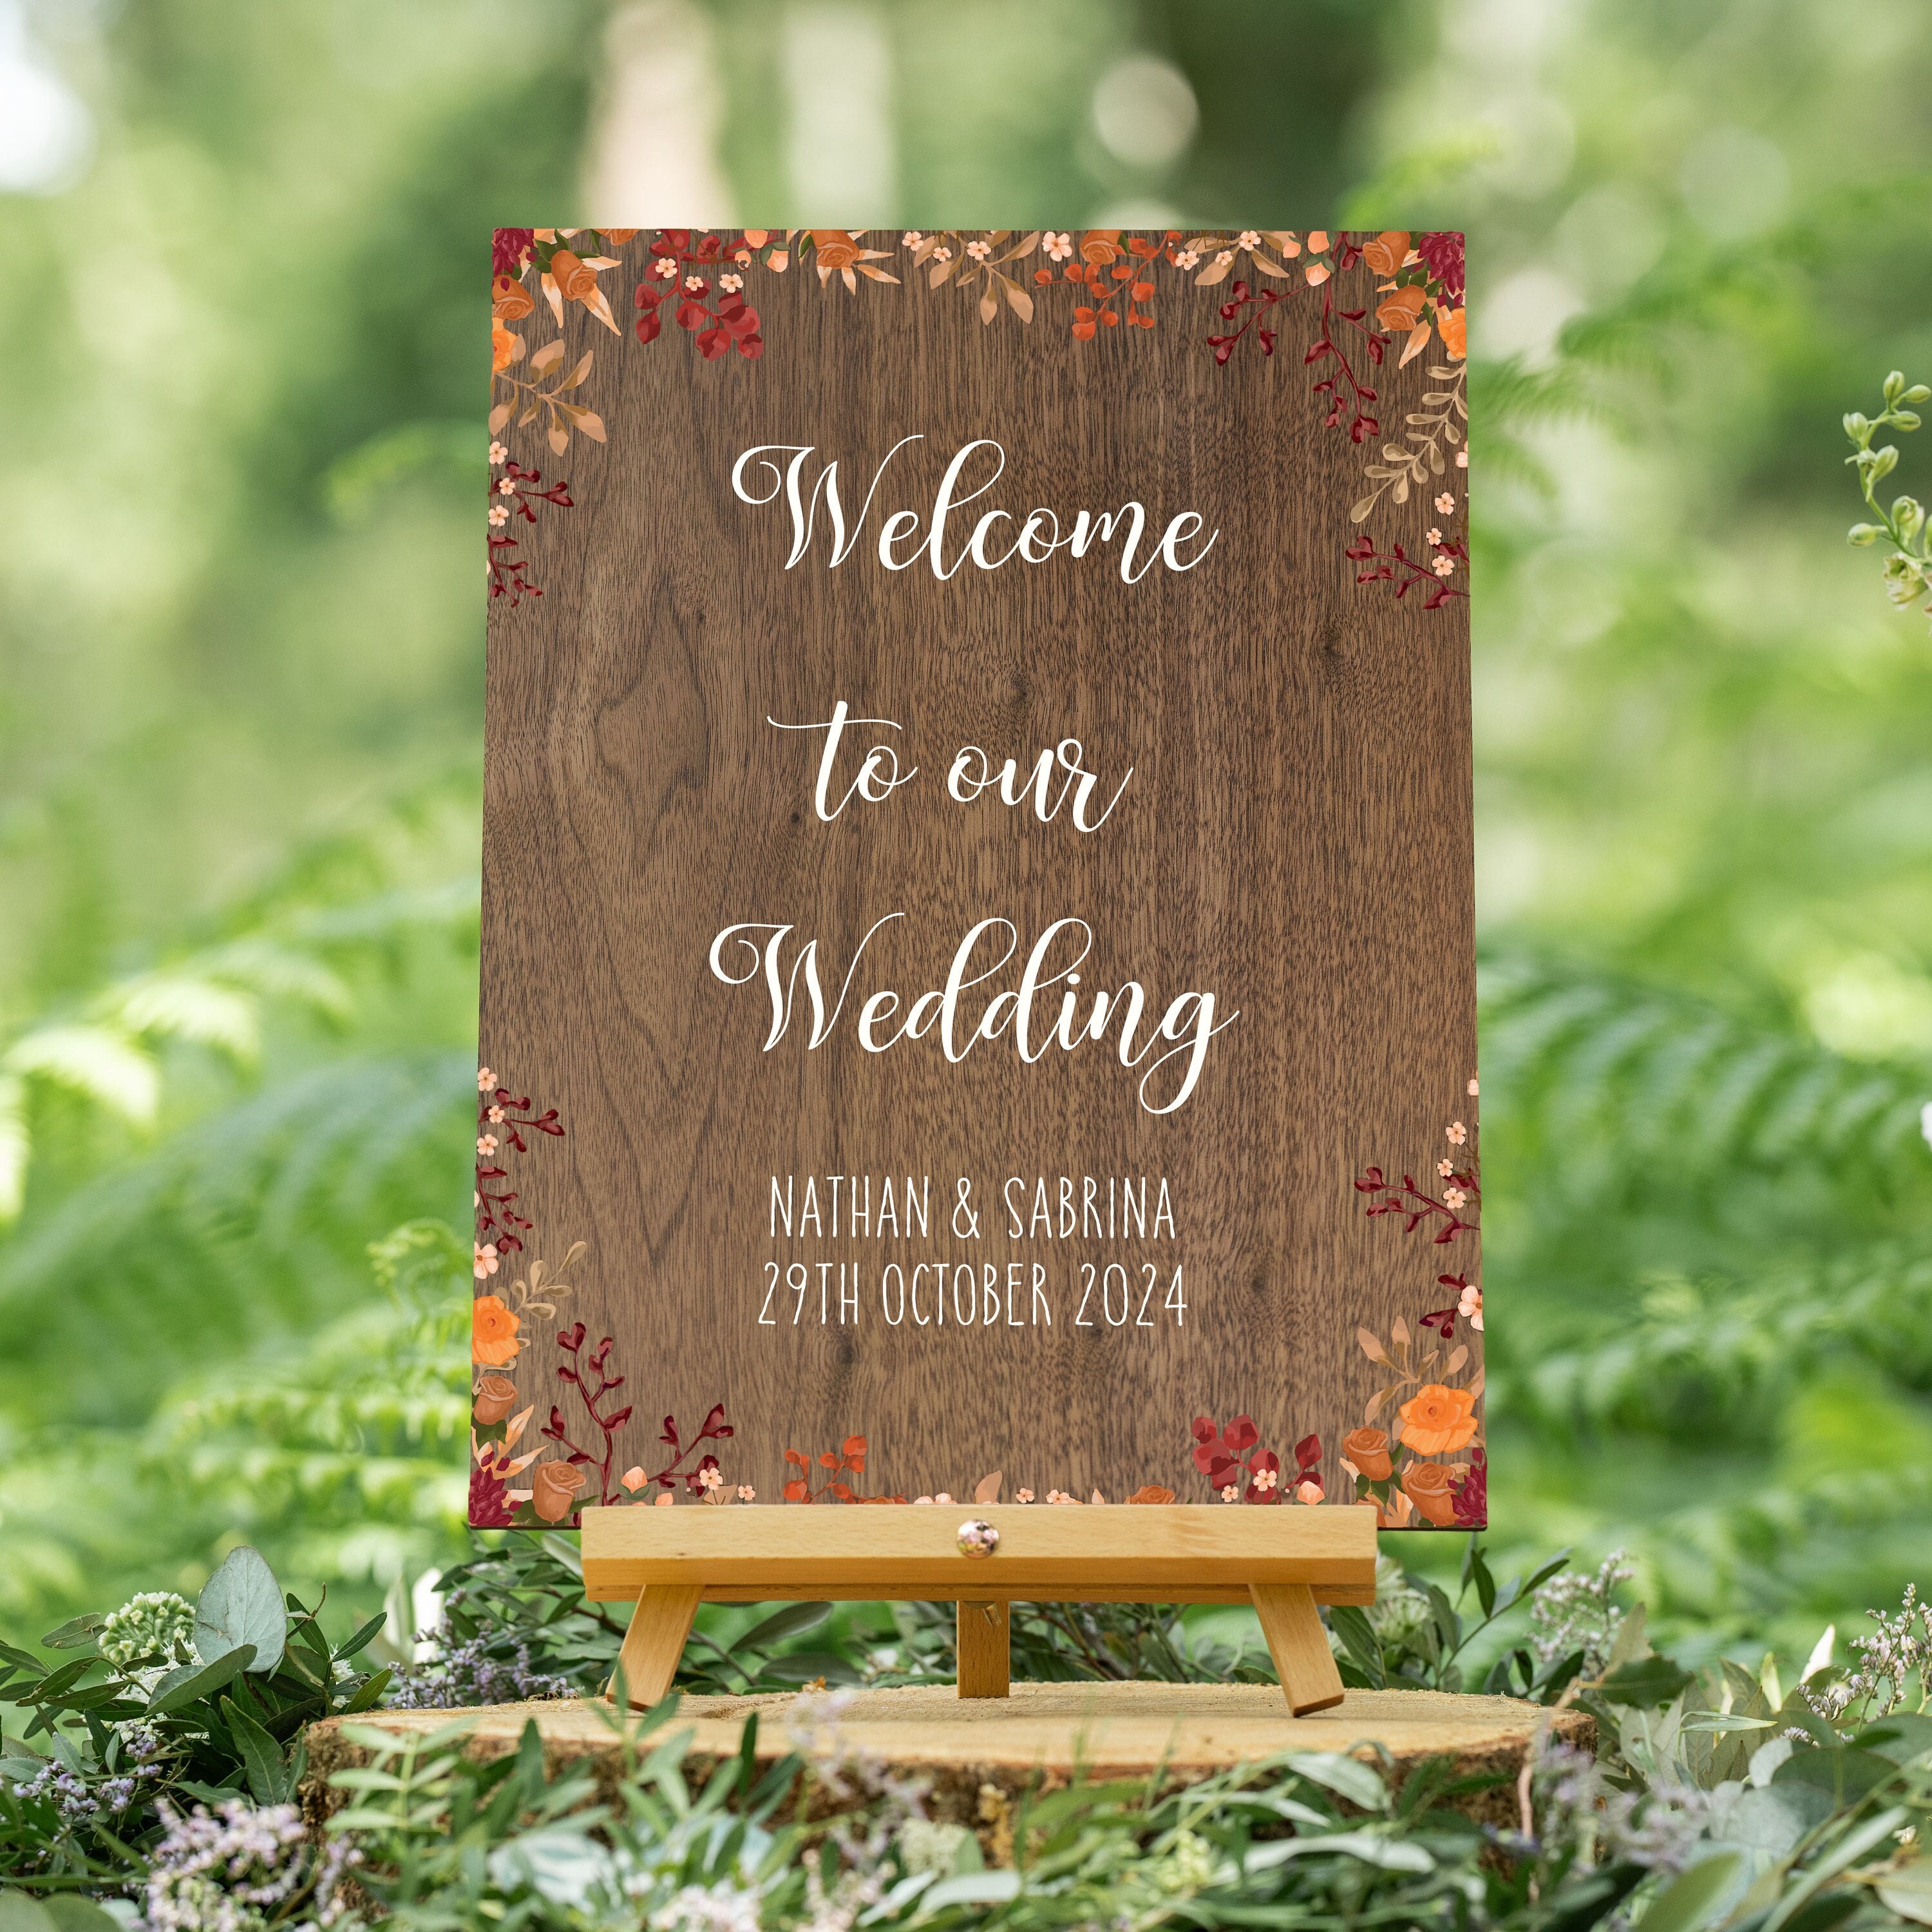 Gold Easel . Large Wedding Sign Stand . Display Lightweight Foam Board,  Canvas, Wood, Acrylic Signs up to 24 X 36 and 8lbs 